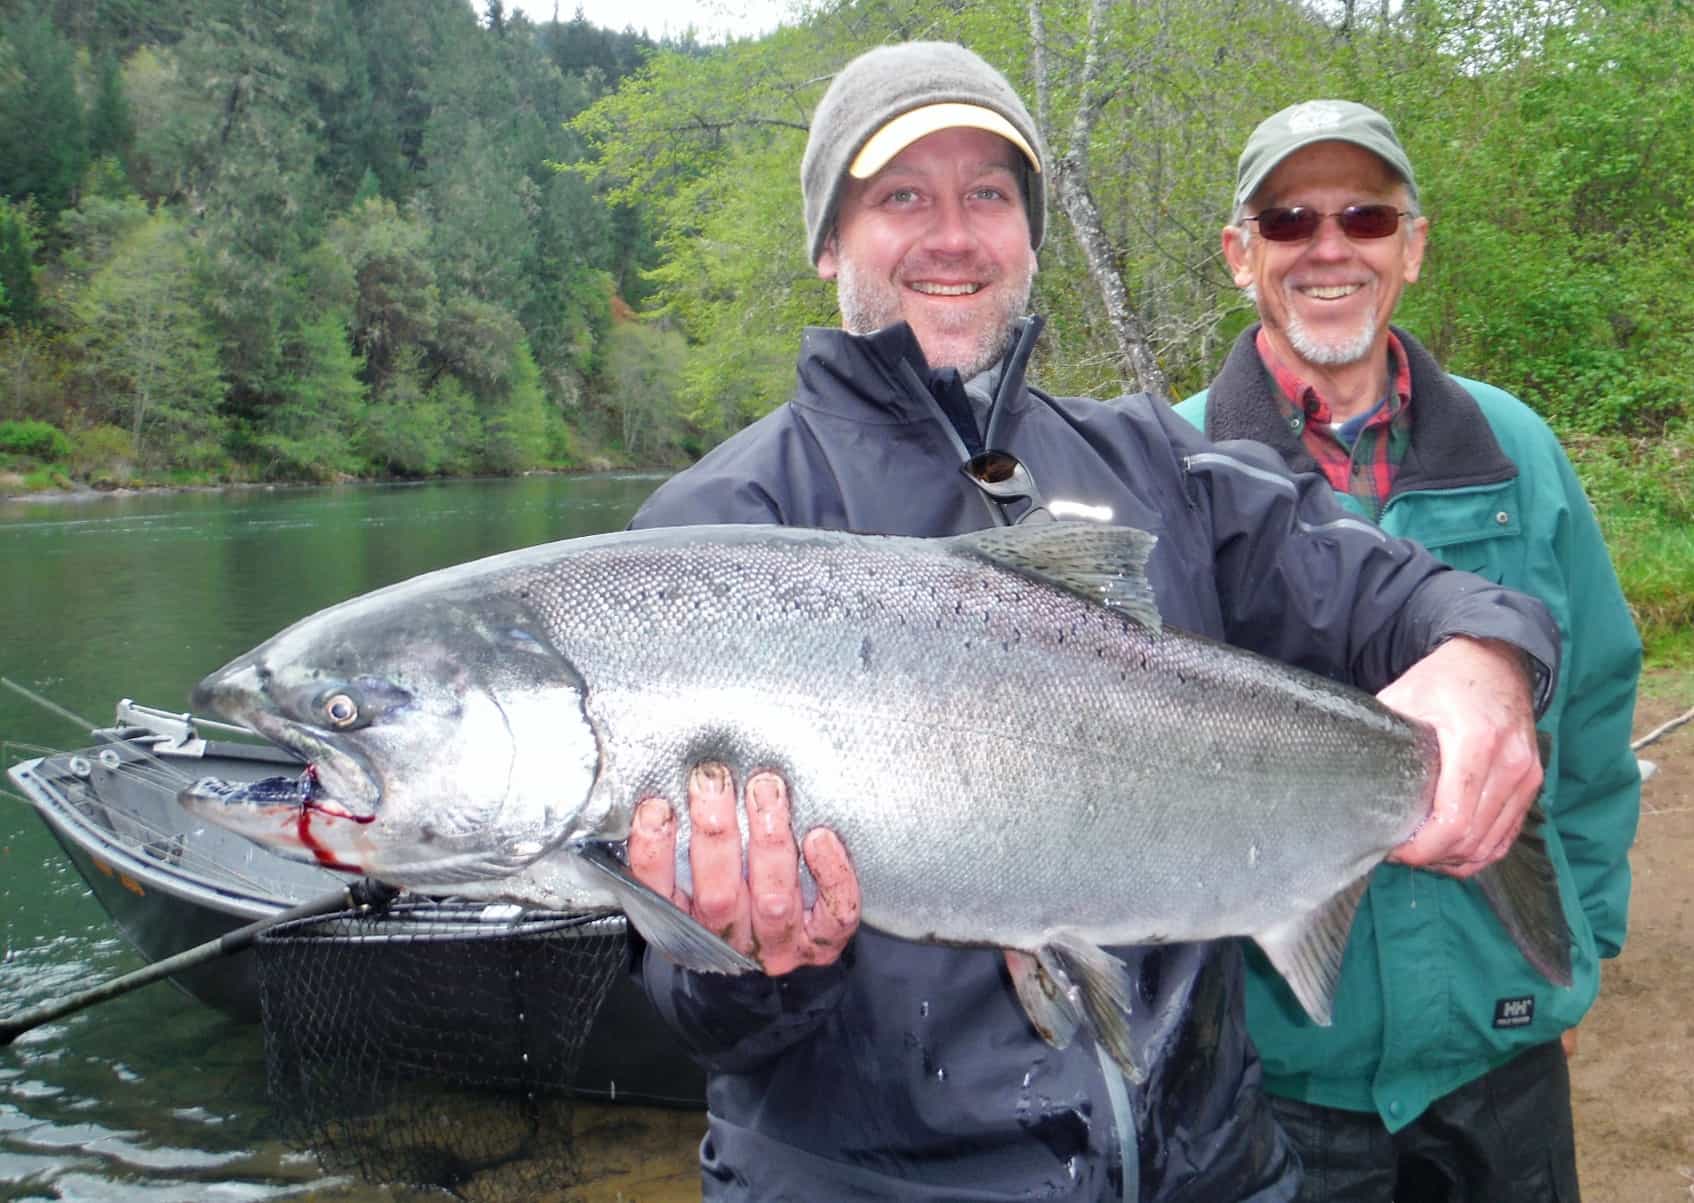 Rogue river spring salmon held by Russ, caught on the upper Rogue river.